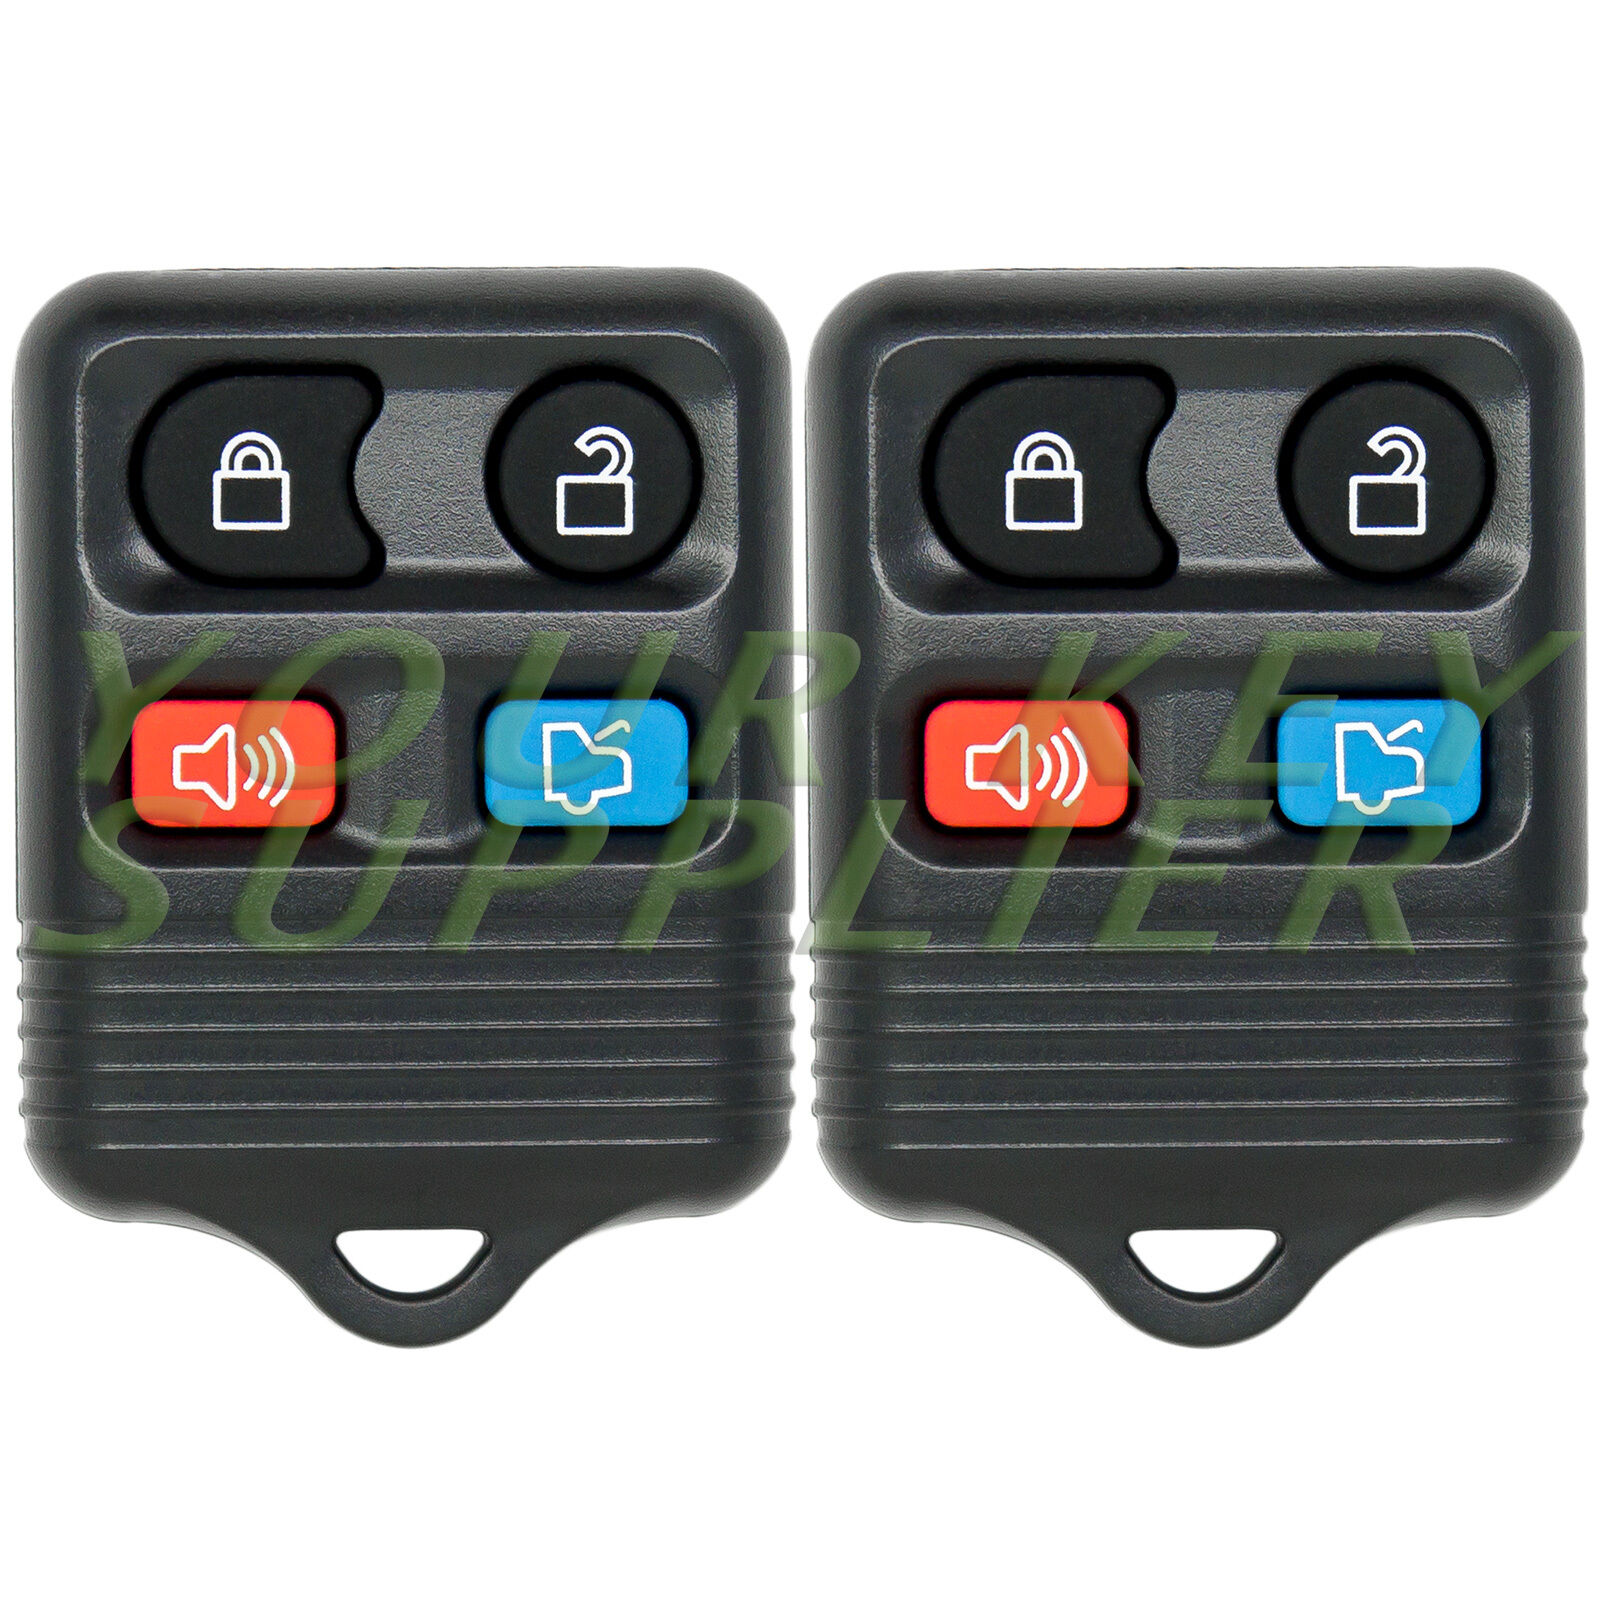 2 New Replacement Keyless Entry Remote Key Fobs for Ford Lincoln Mercury